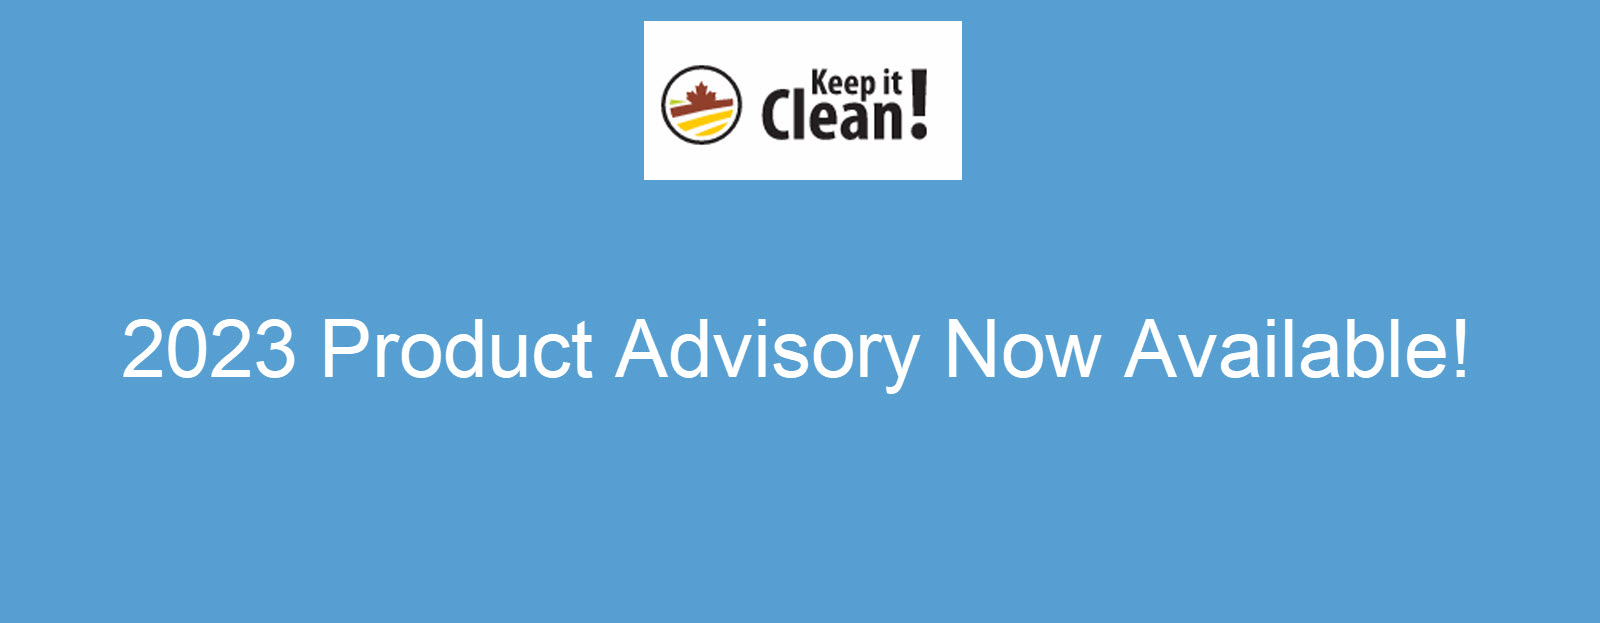 Banner for Keep It Clean Advisory Products